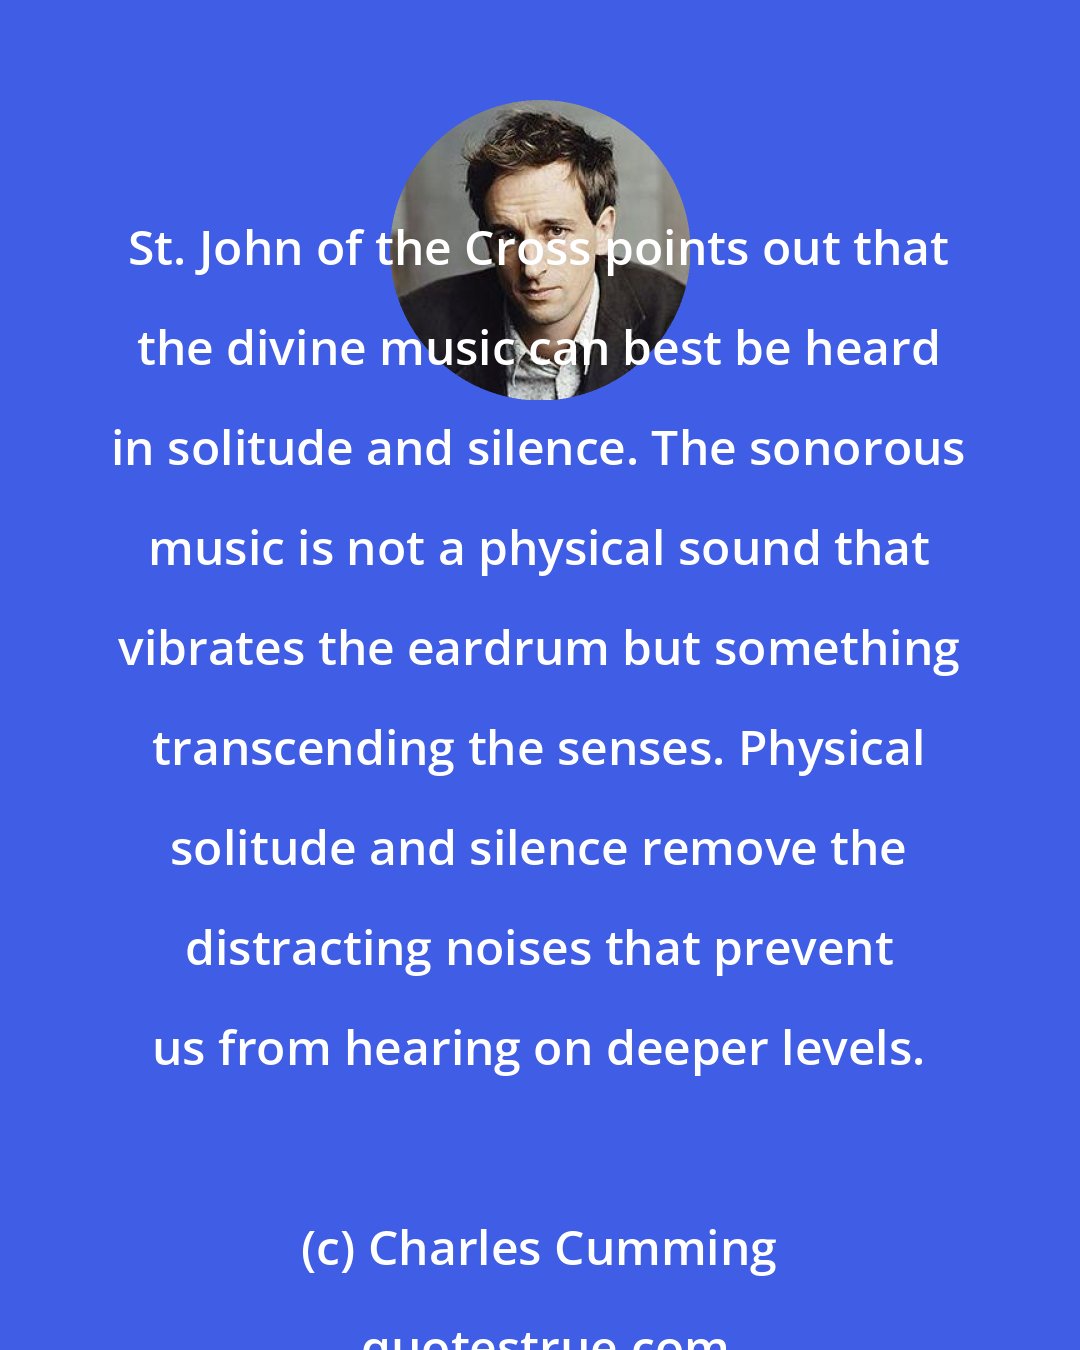 Charles Cumming: St. John of the Cross points out that the divine music can best be heard in solitude and silence. The sonorous music is not a physical sound that vibrates the eardrum but something transcending the senses. Physical solitude and silence remove the distracting noises that prevent us from hearing on deeper levels.